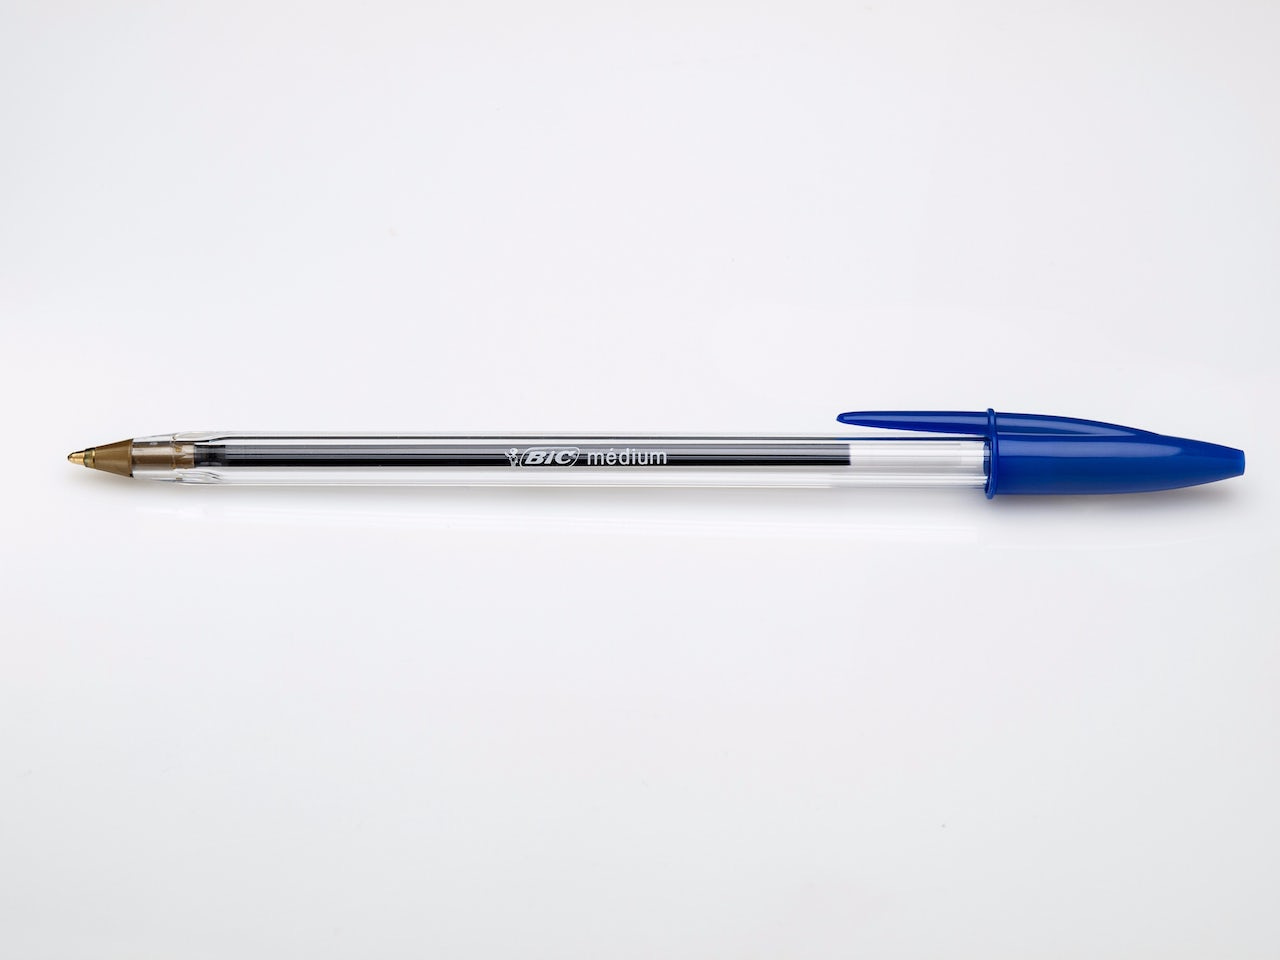 Gold Standard: the Bic Cristal pen | The Outline